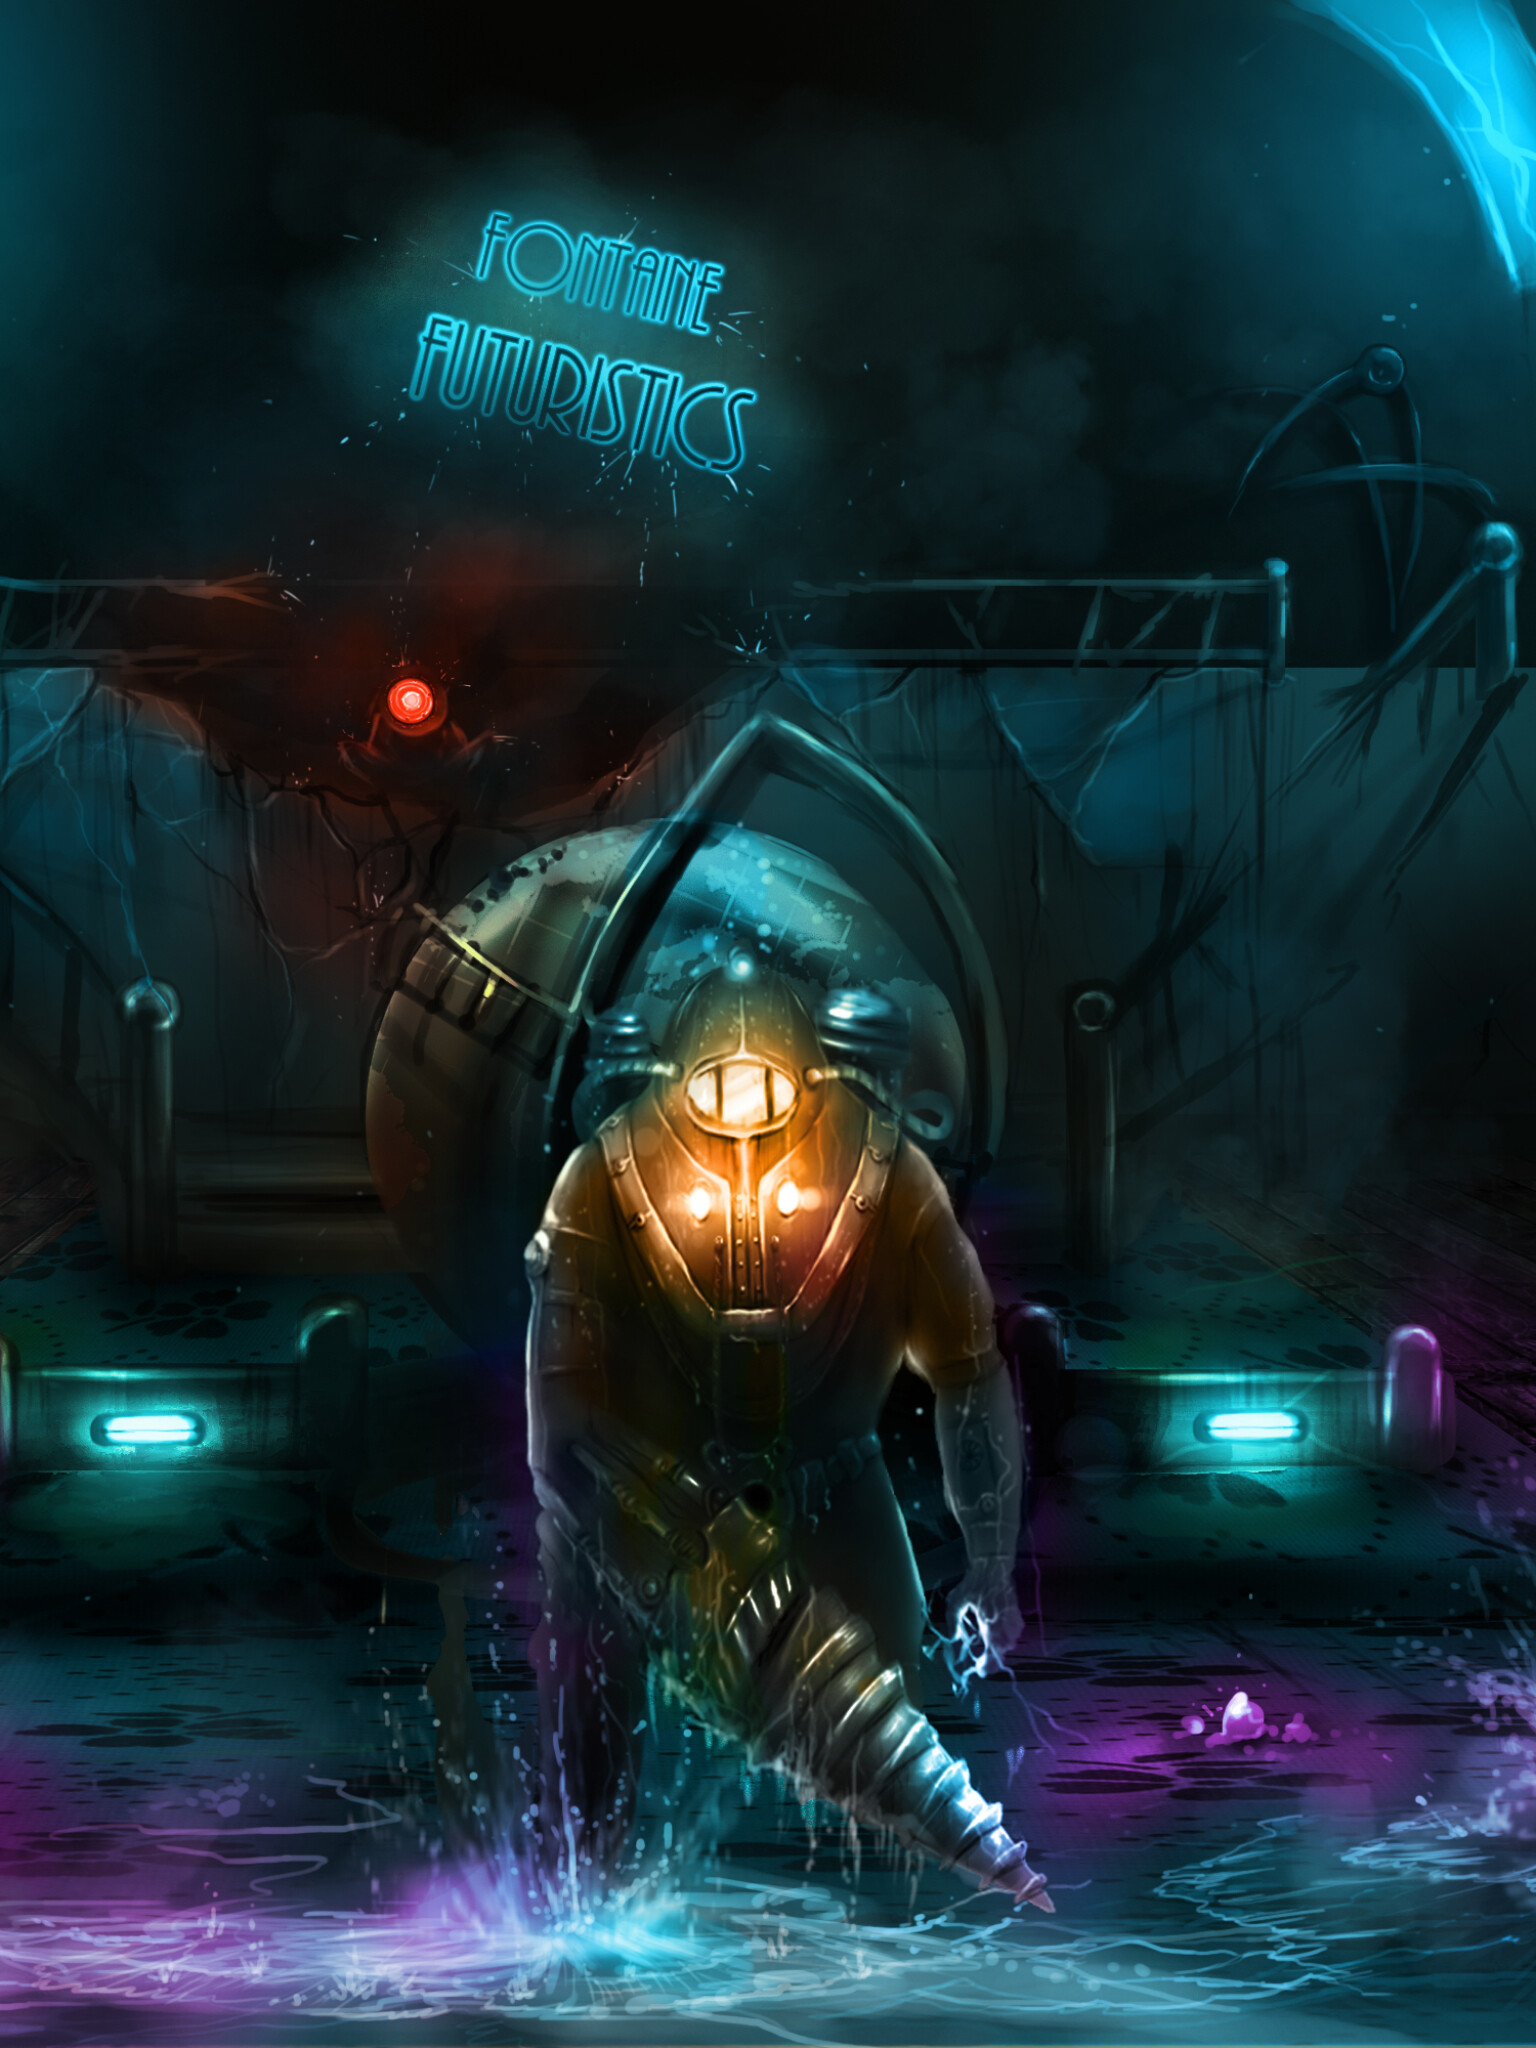 BioShock: Players control the armored protagonist Subject Delta, Video game. 1540x2050 HD Wallpaper.